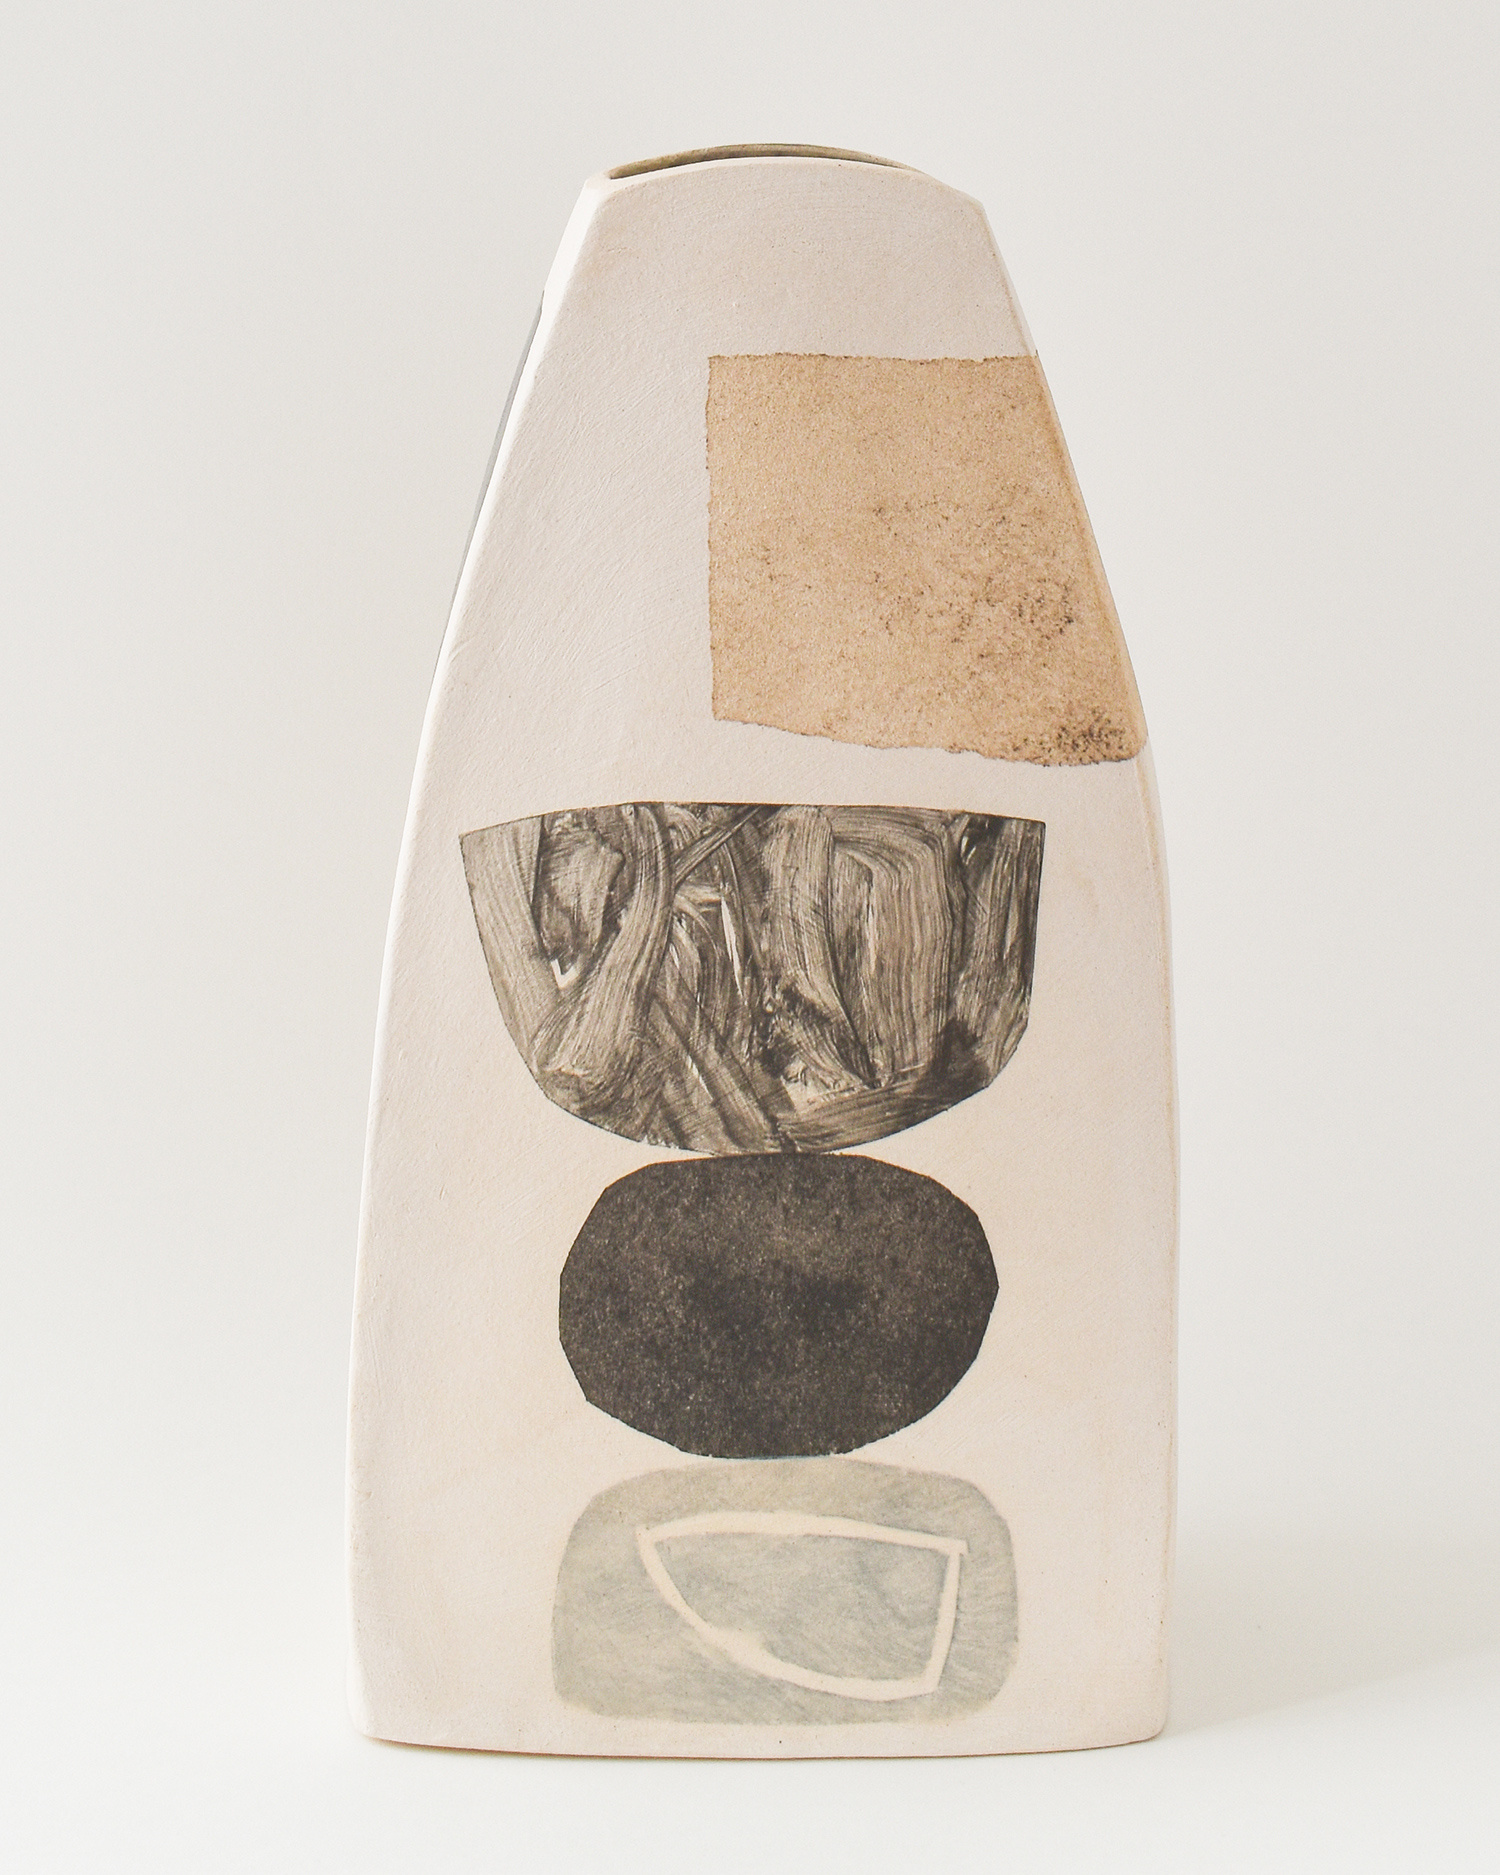 Tapered Vessel, large by Louise McNiff